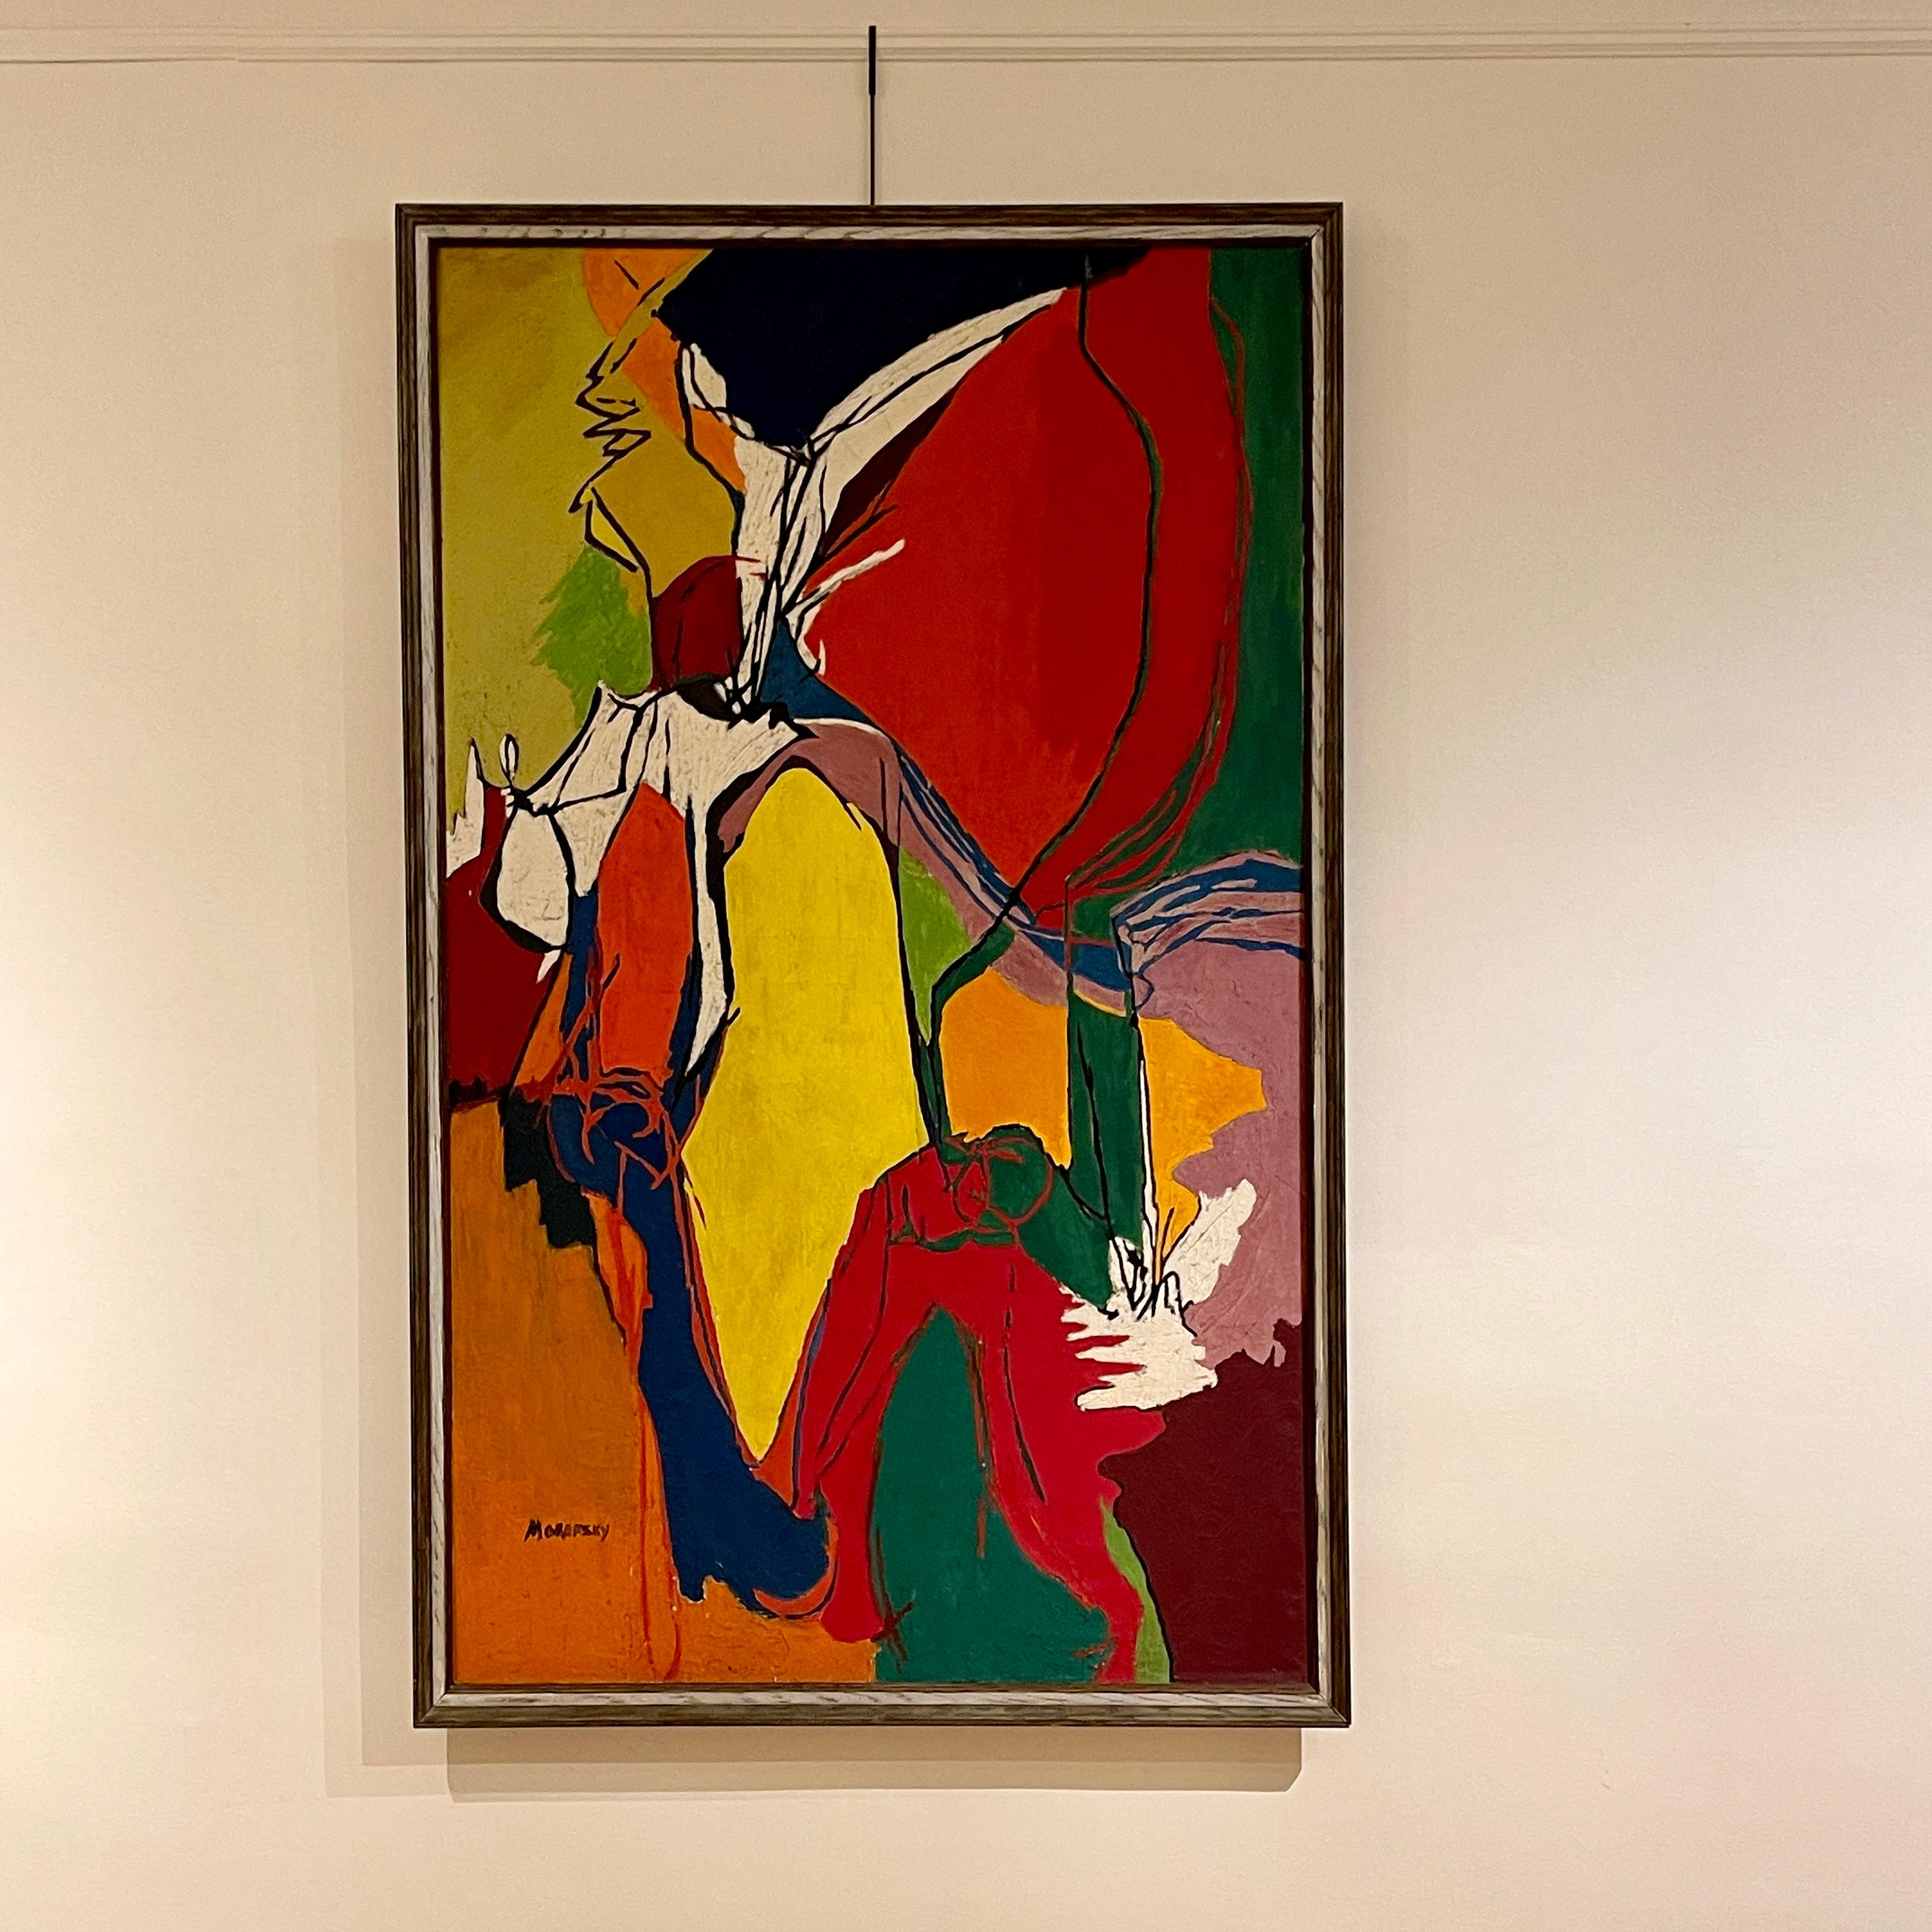 Stunning large scale framed painting on canvas from the 1960s by Frances Morofsky Bennick